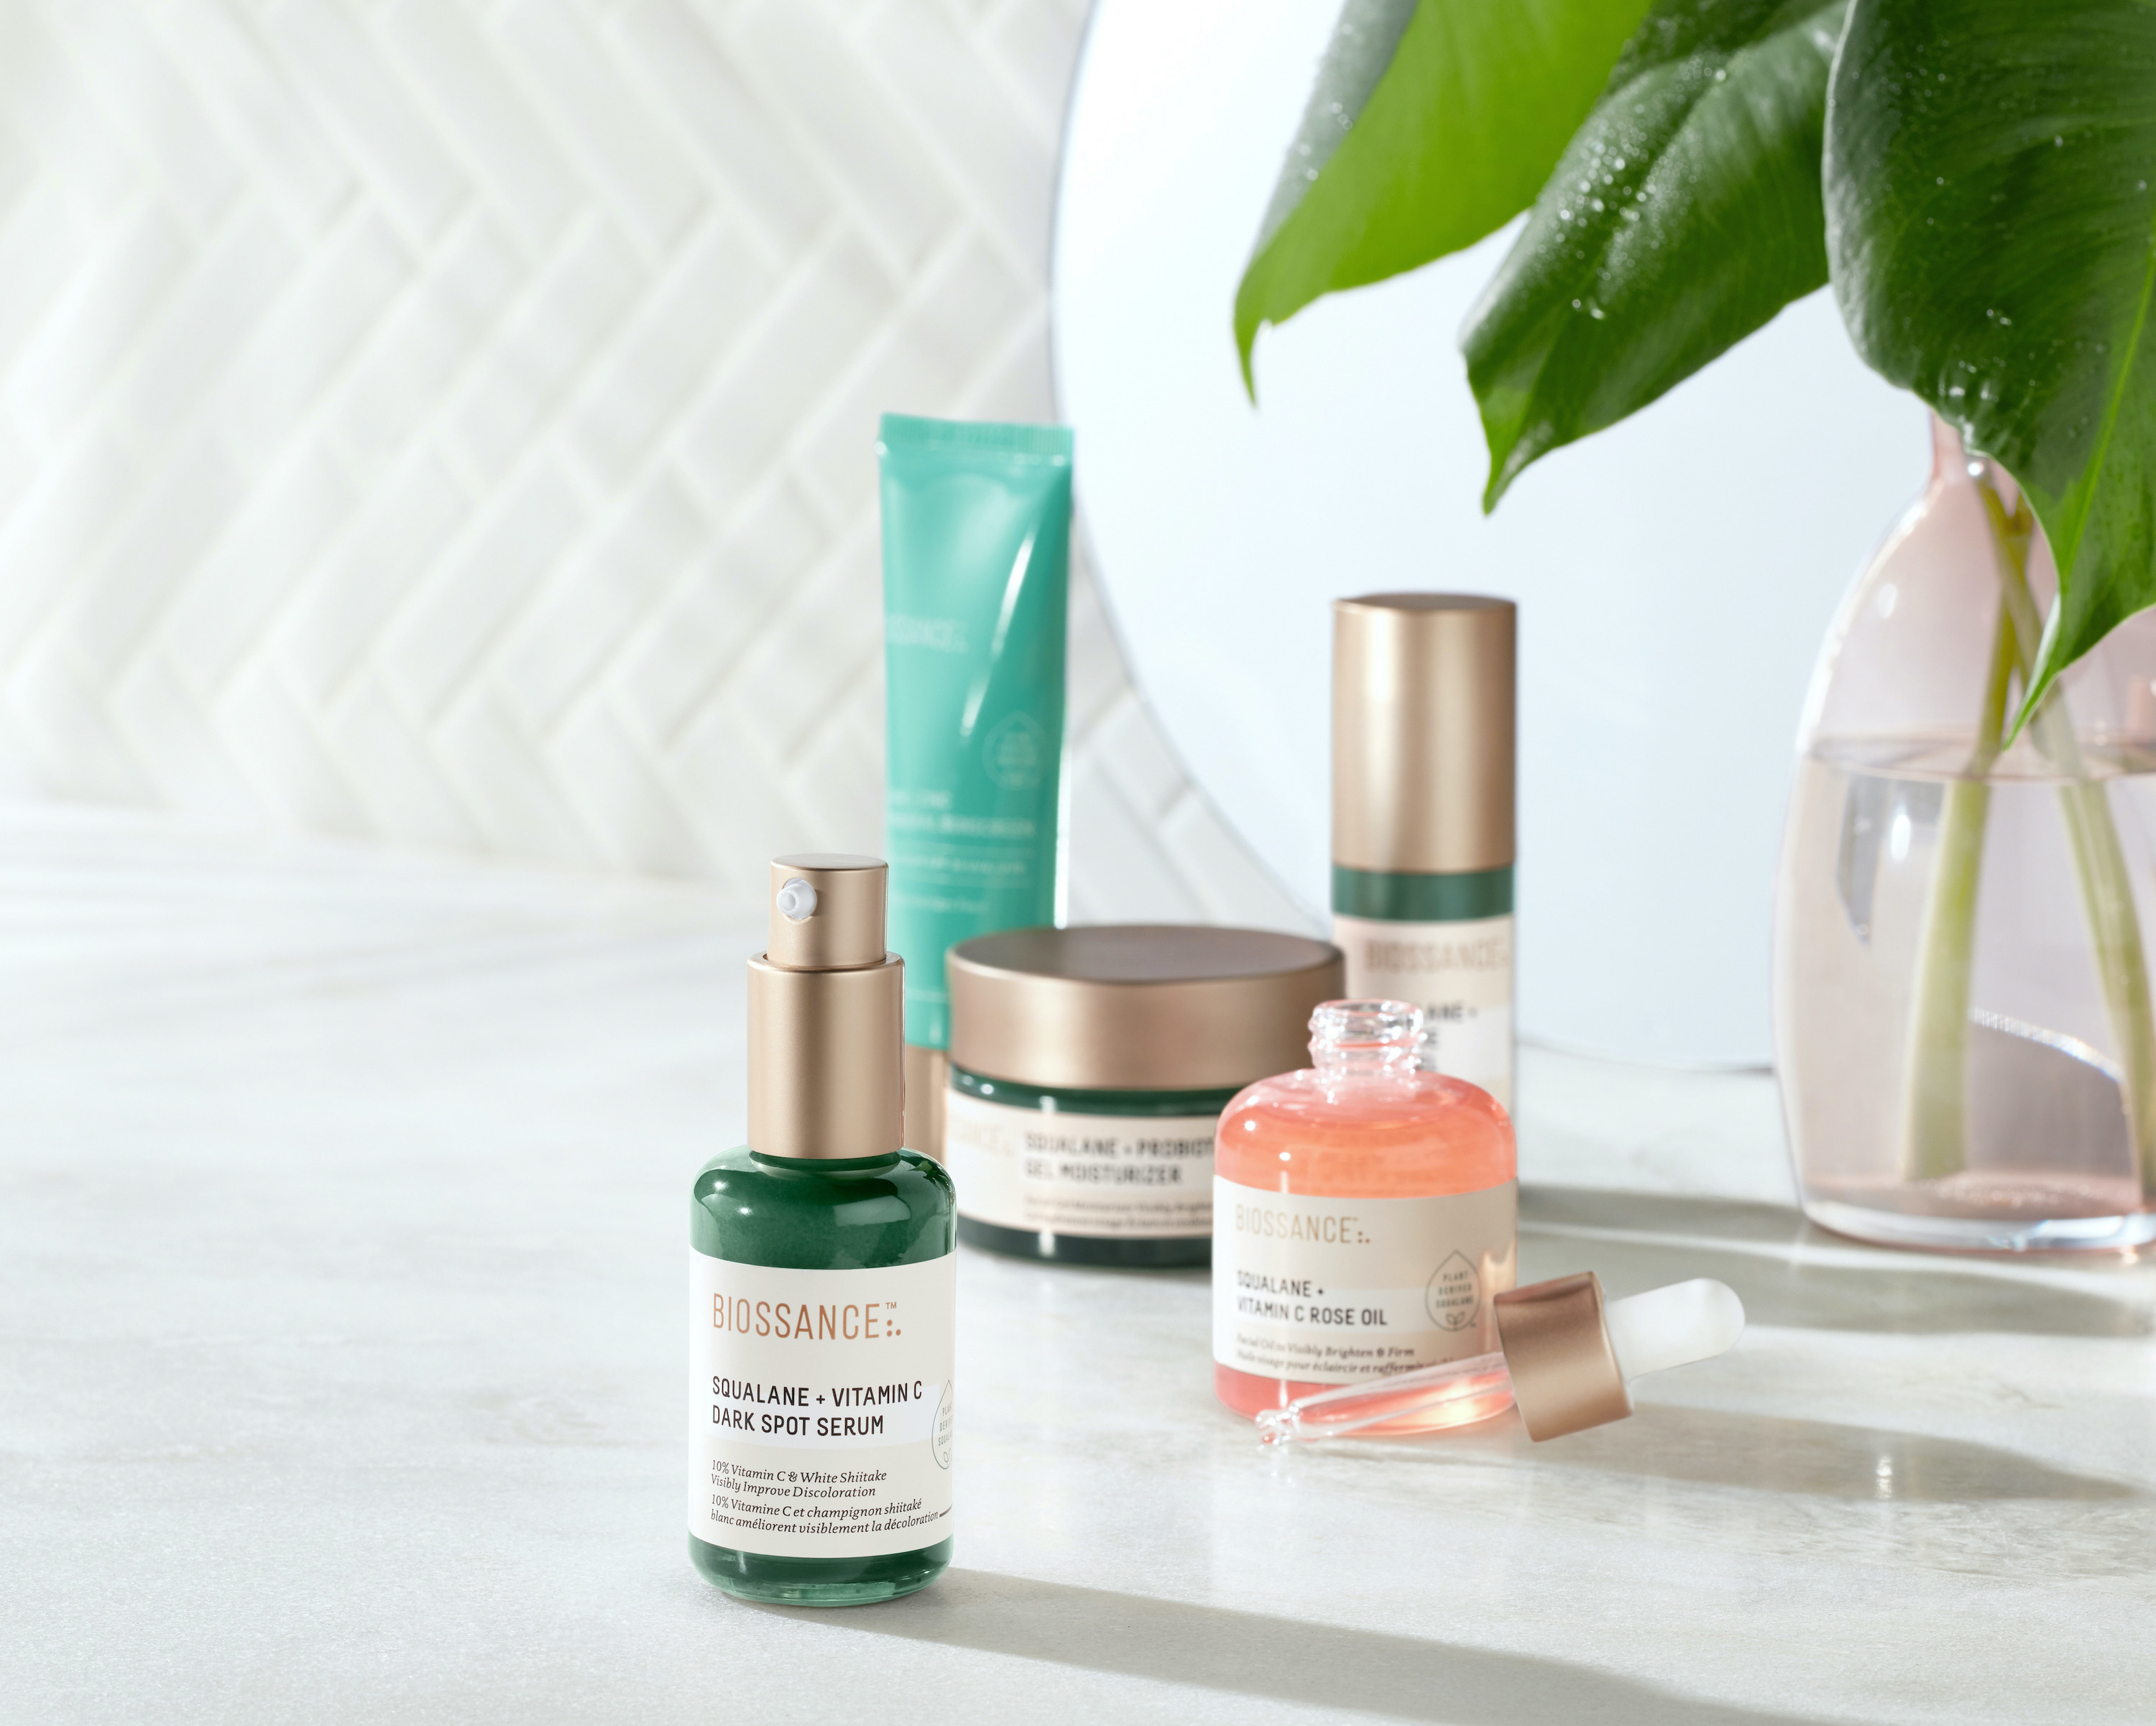 The Squalane and Vitamin C Dark Spot Serum in a green bottle with a metallic pump top sitting in front of a mix of other Biossance products 